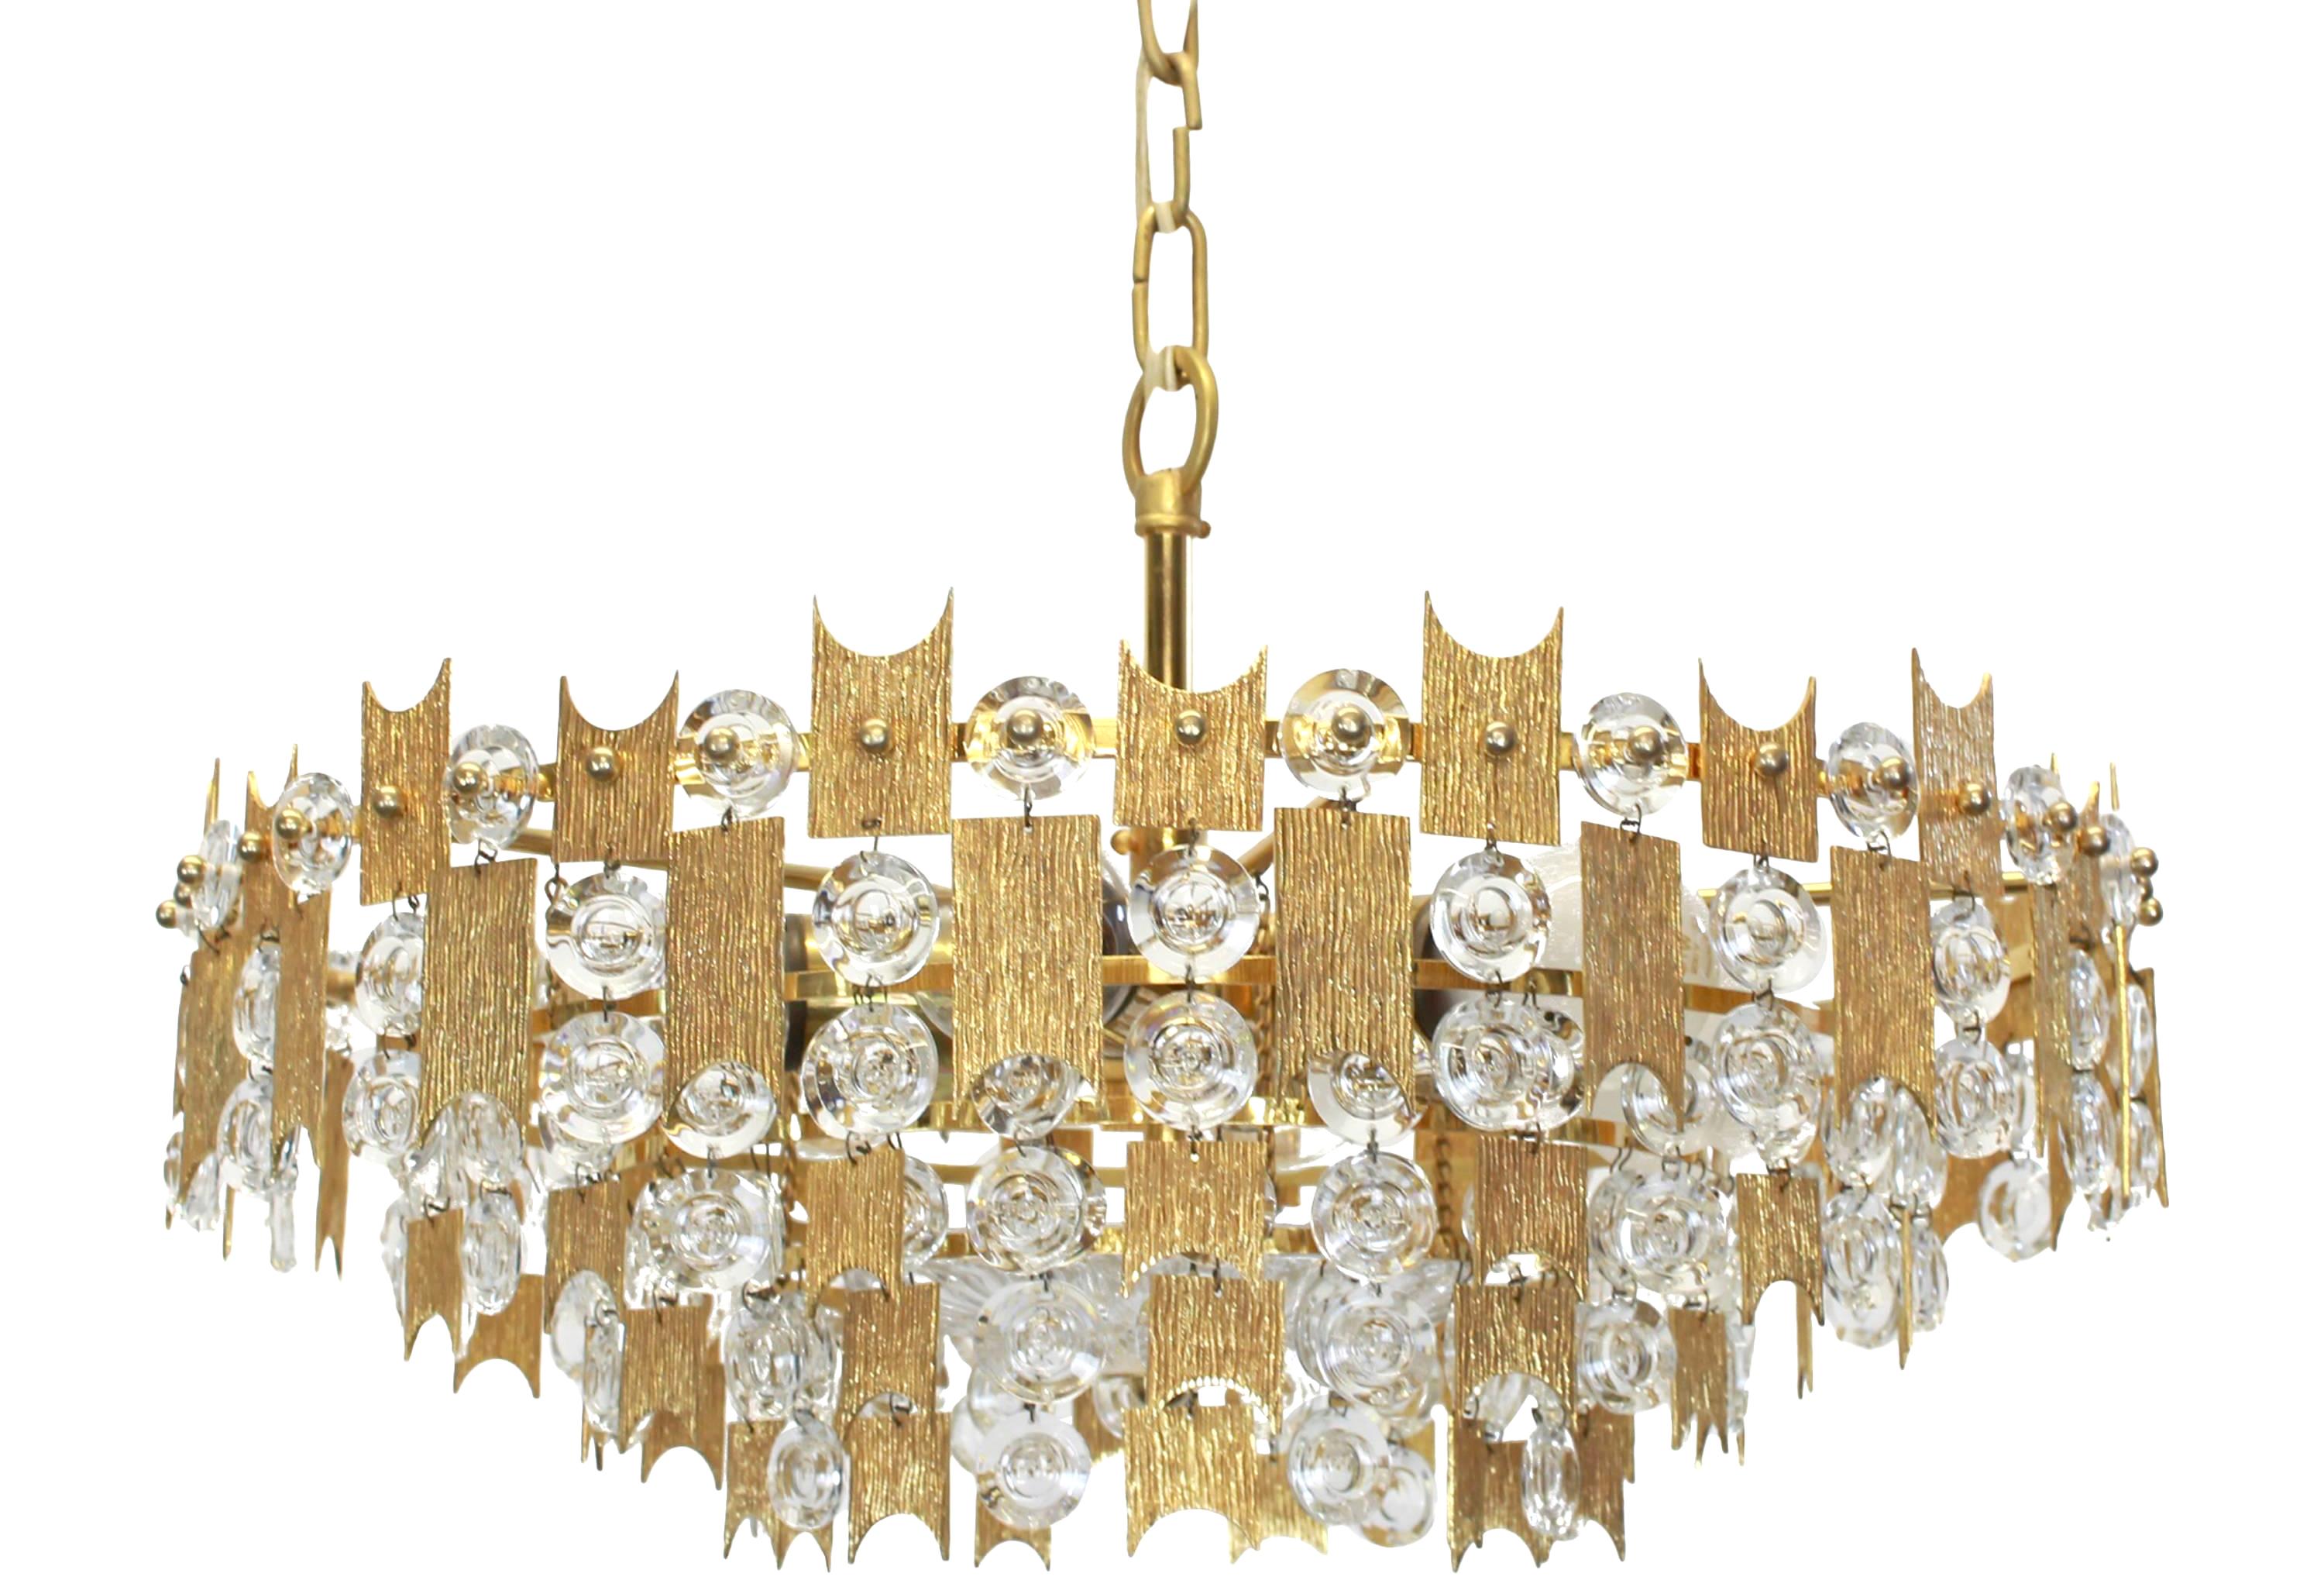 1 of 2  stunning chandeliers by Palwa (Palme and Walter), Germany, manufactured in the 1960s. Each chandelier is composed of jewel-like glass pieces and brass plates with a Brutalist relief.

Sockets: It needs six x E27 standard bulbs to illuminate,